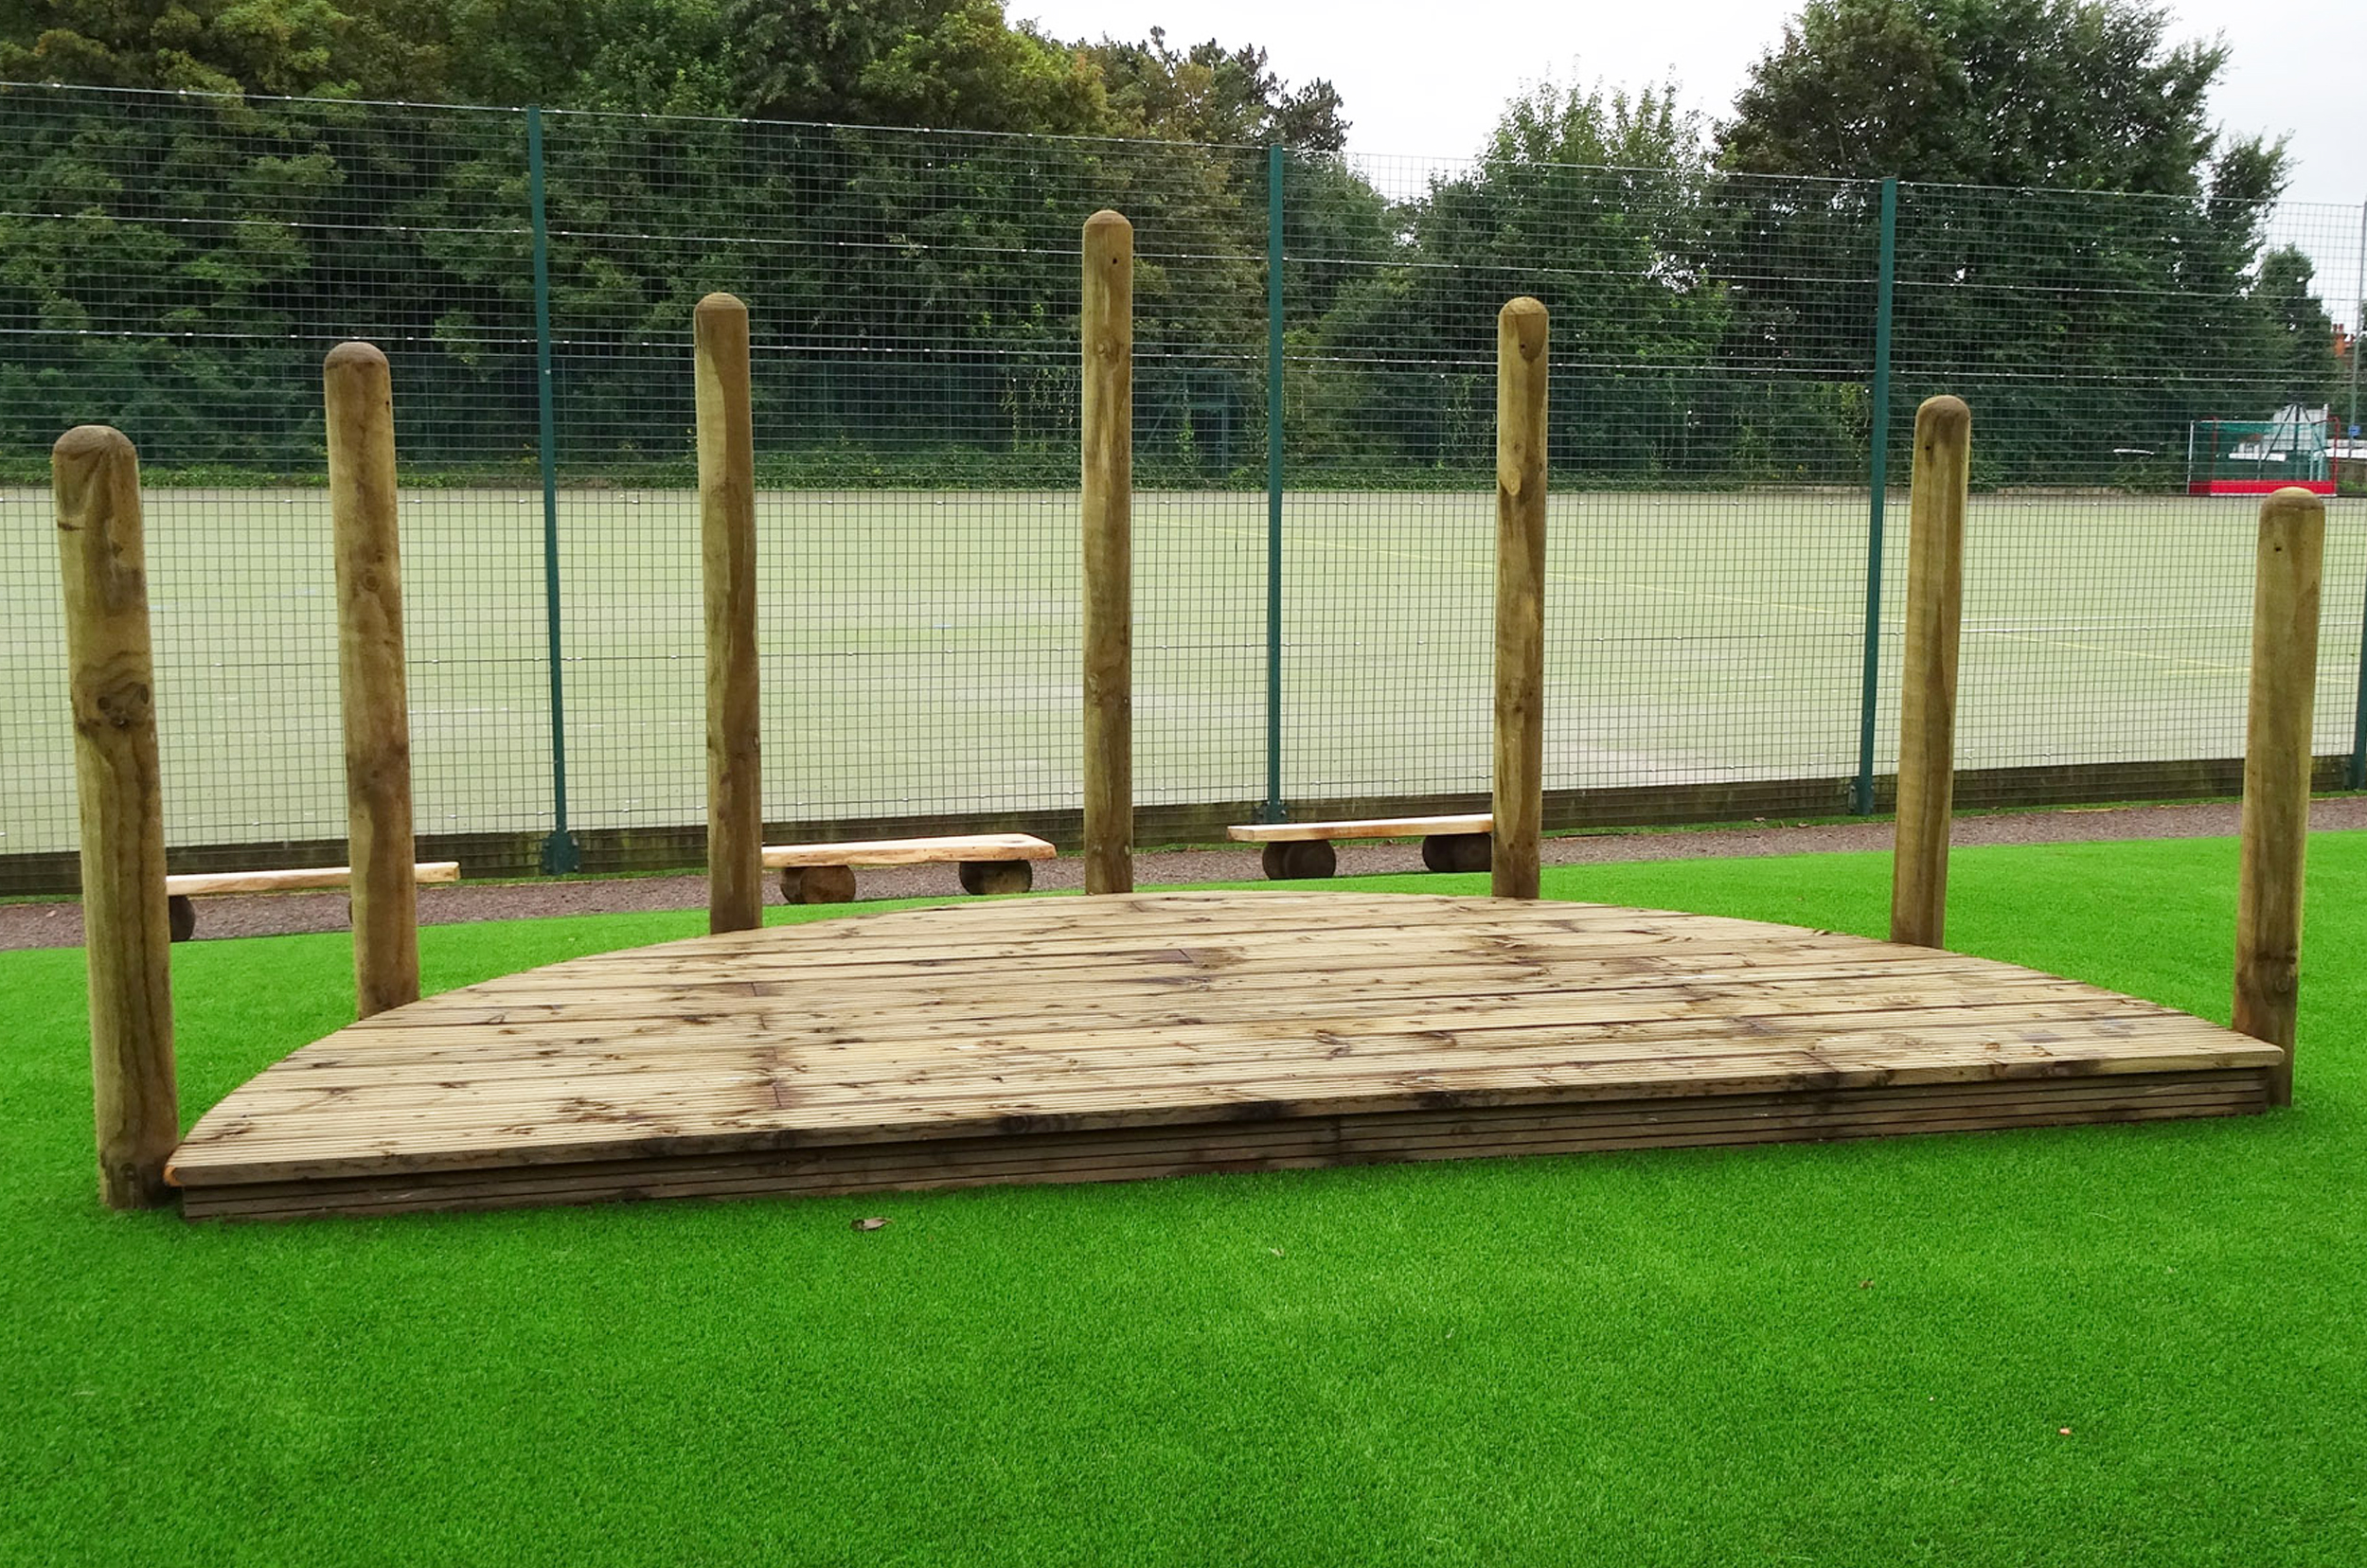 Semi Circular timber stage construction made of decking grooved timber and vertical surround poles sits on green artificial grass